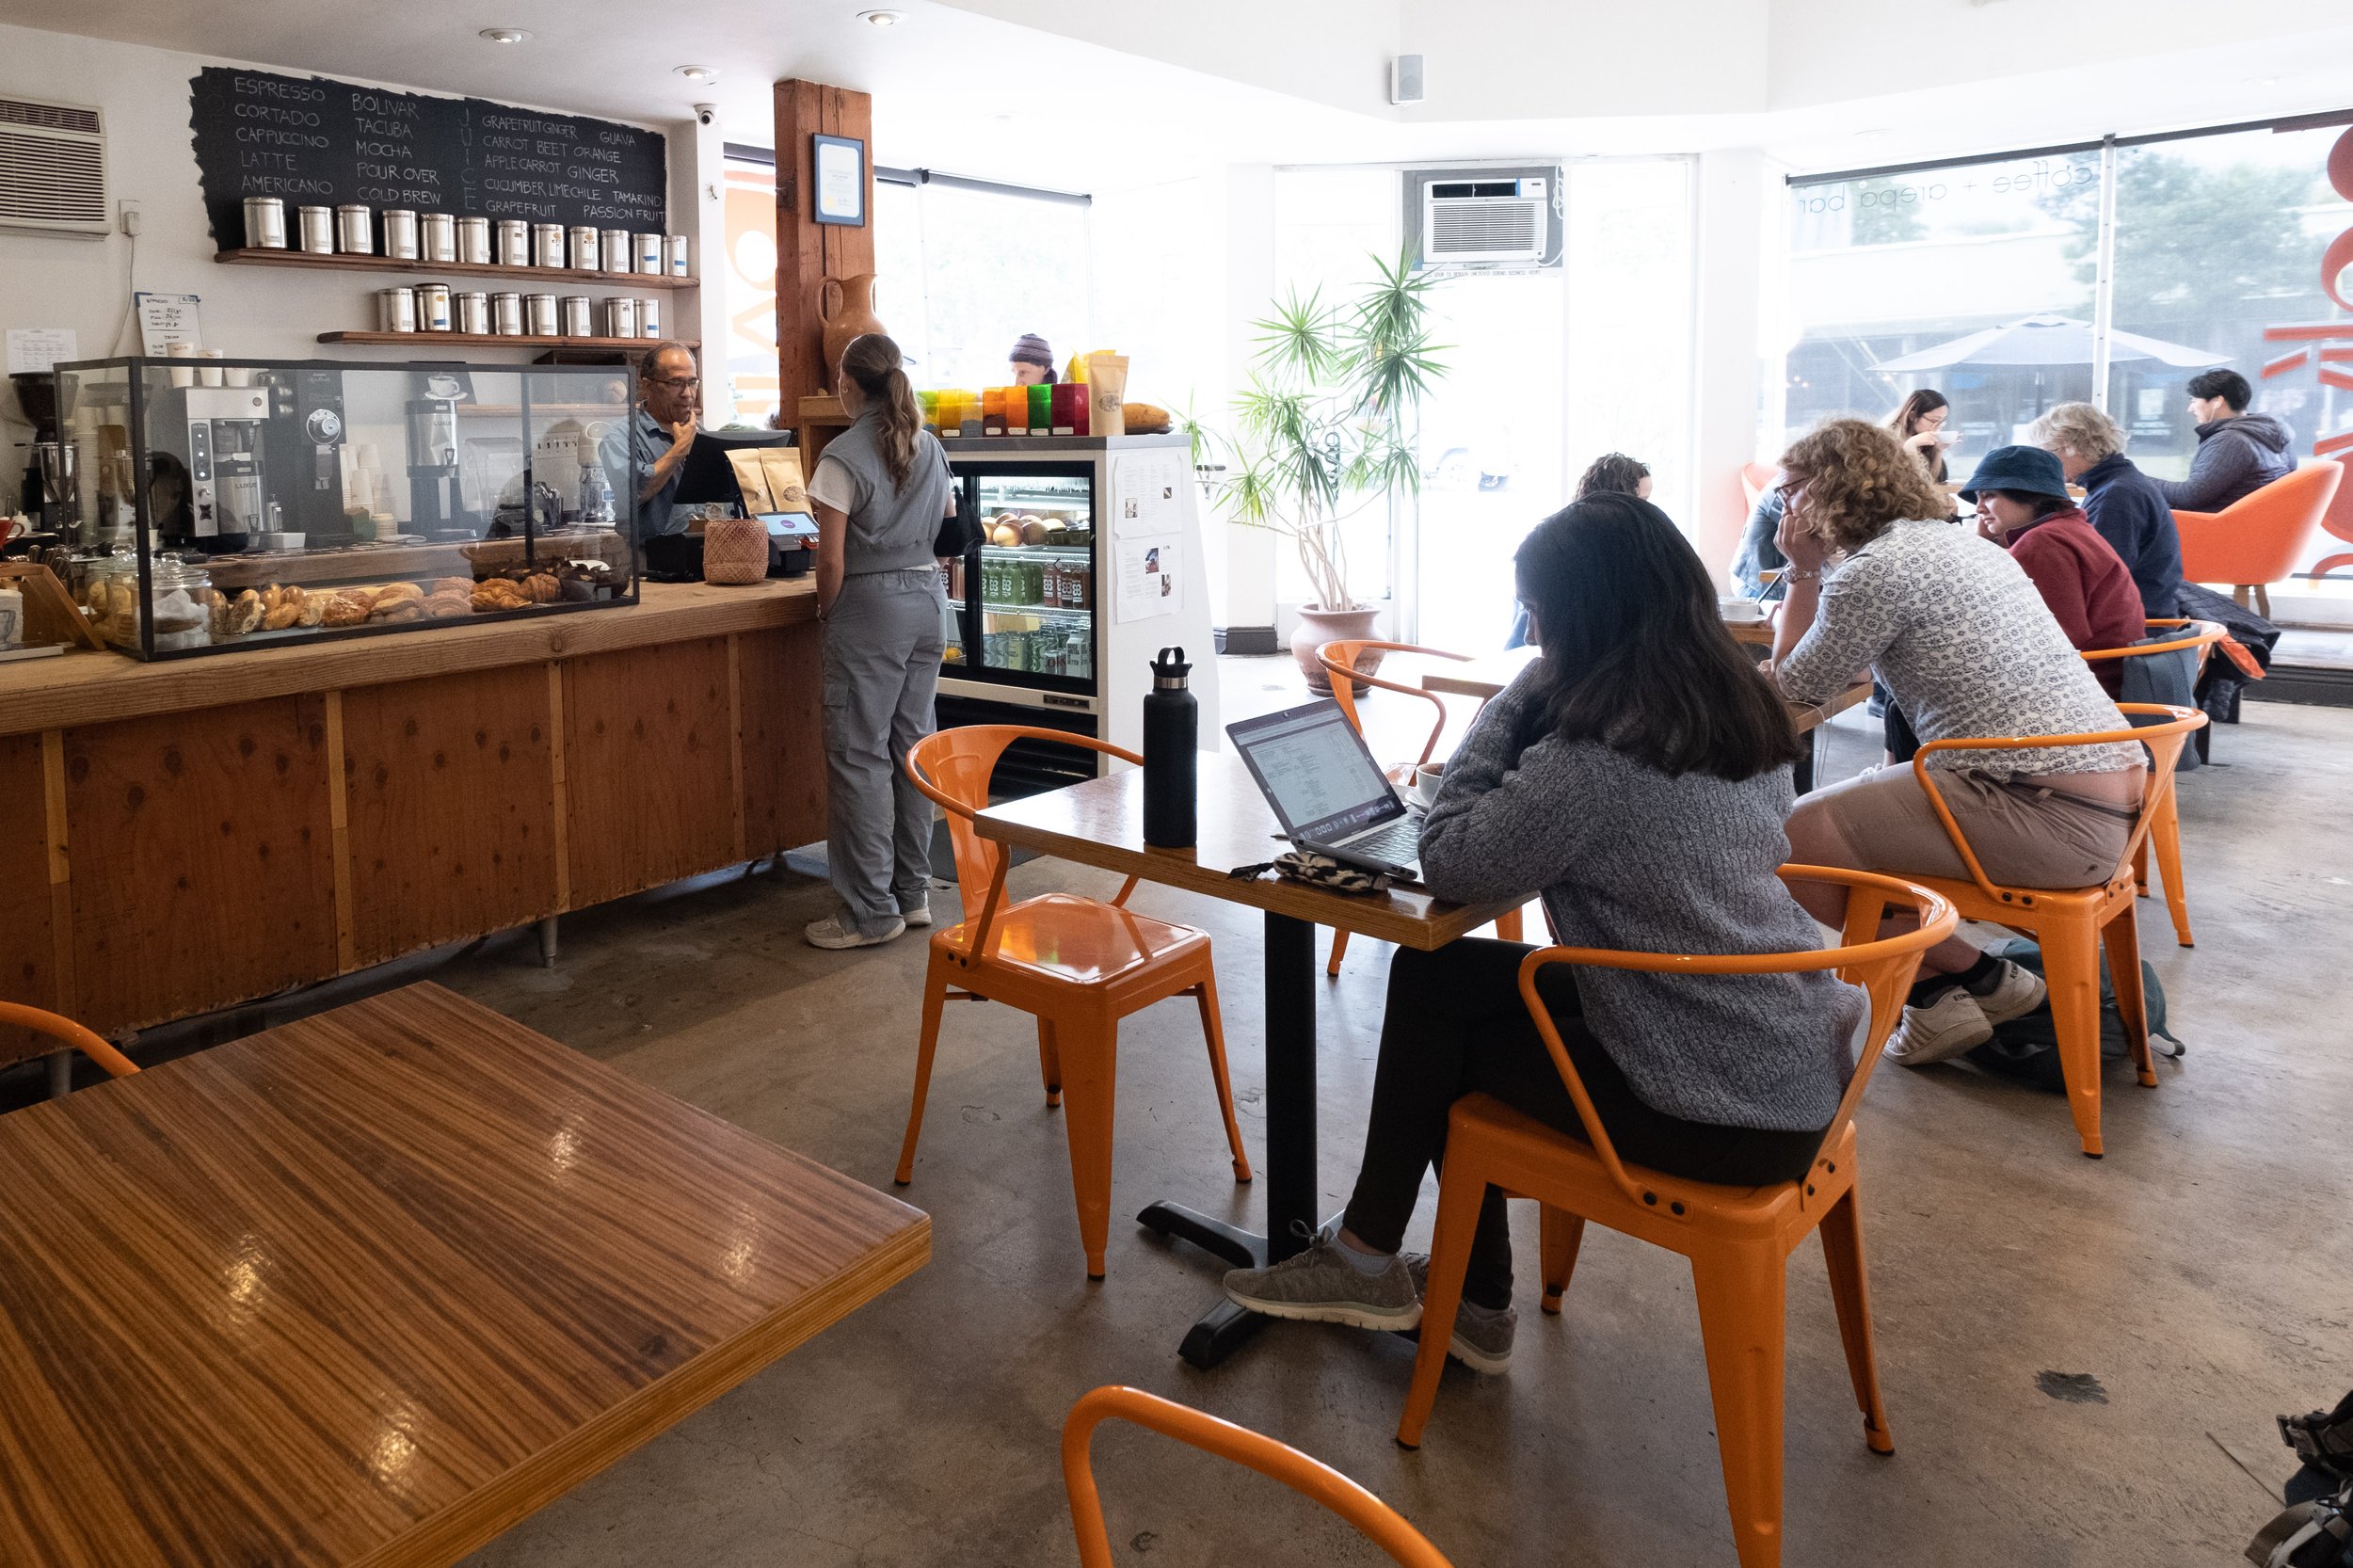  Patrons sit and work inside Bolivar Cafe, located on Ocean Park Blvd. and 18th St. In addition to the usual coffee drinks, they have a plethora of teas to choose from, along with fresh squeezed juices, sandwiches, pastries, and arepas, a Nicaraguan 